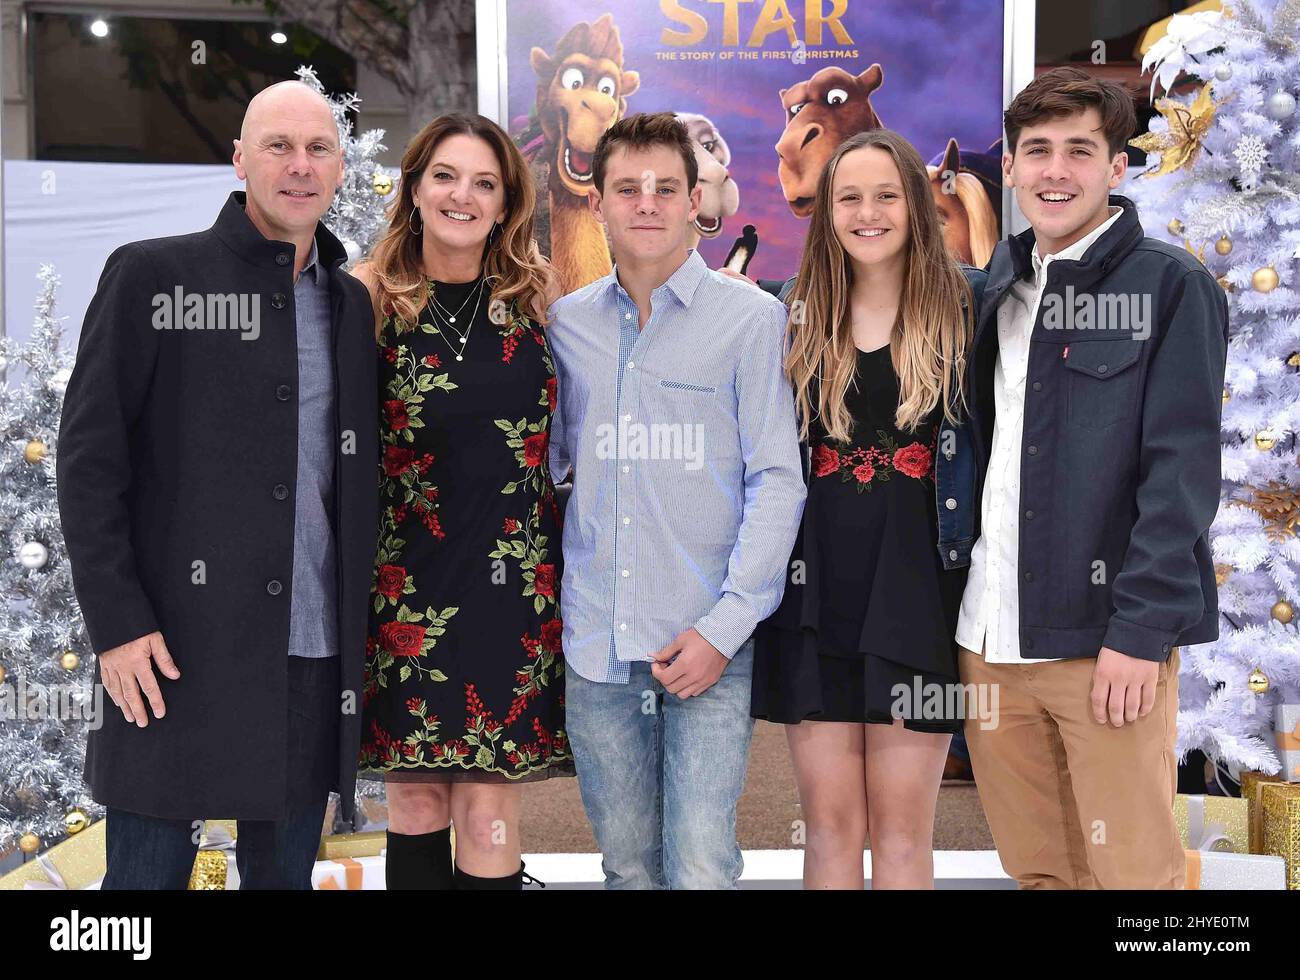 Stewart Cook, Jennifer Magee-Cook attending the world premiere of The Star, in Los Angeles, California Stock Photo